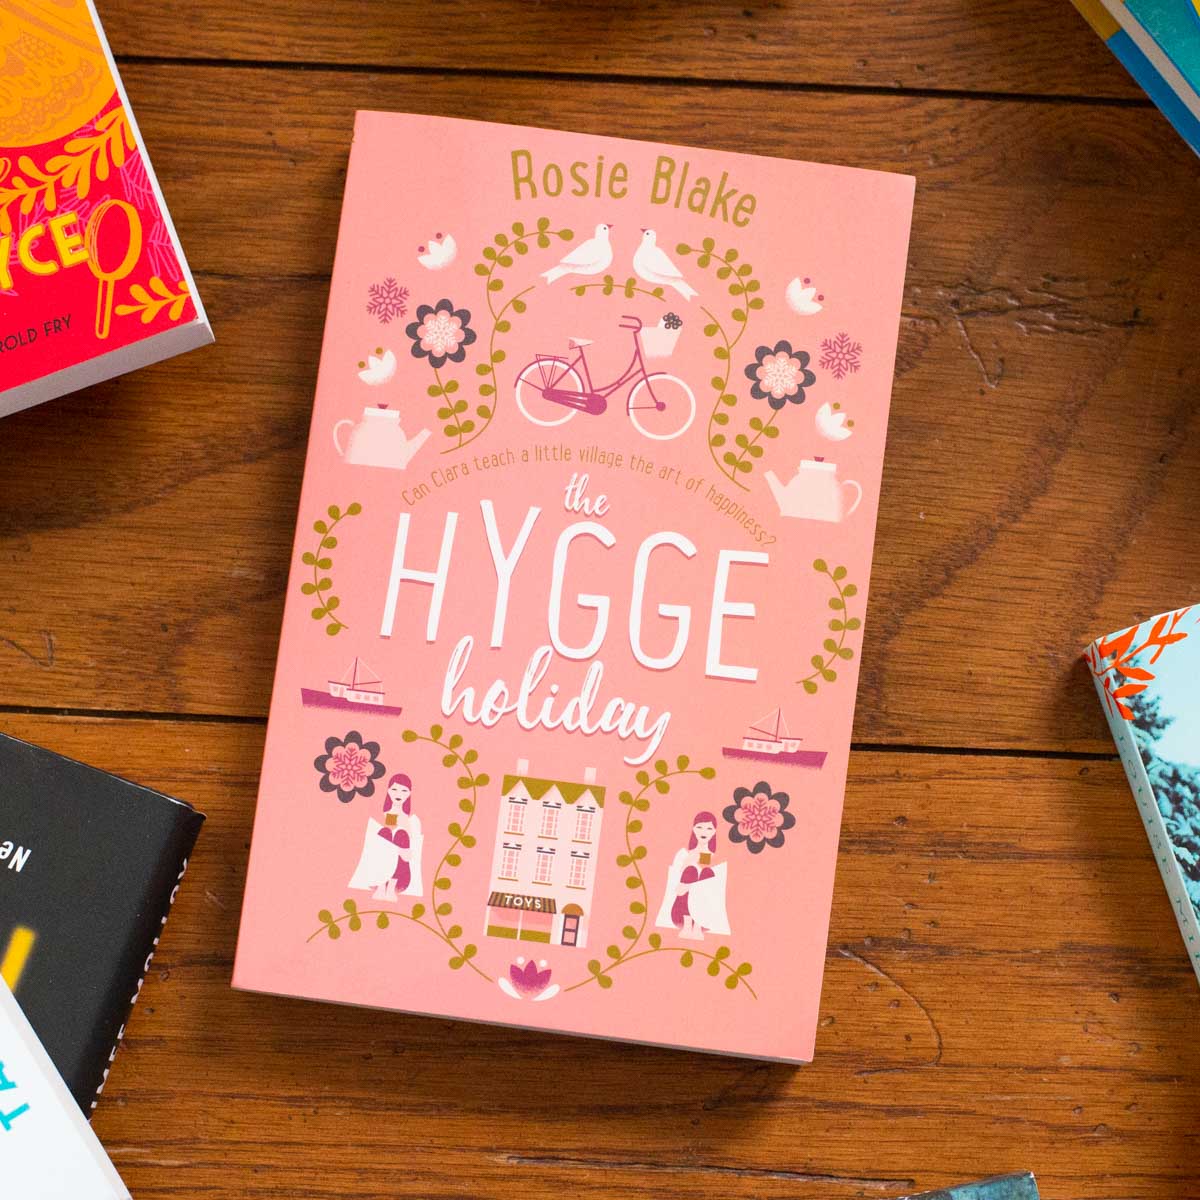 A copy of the book The Hygge Holiday sits on the table.